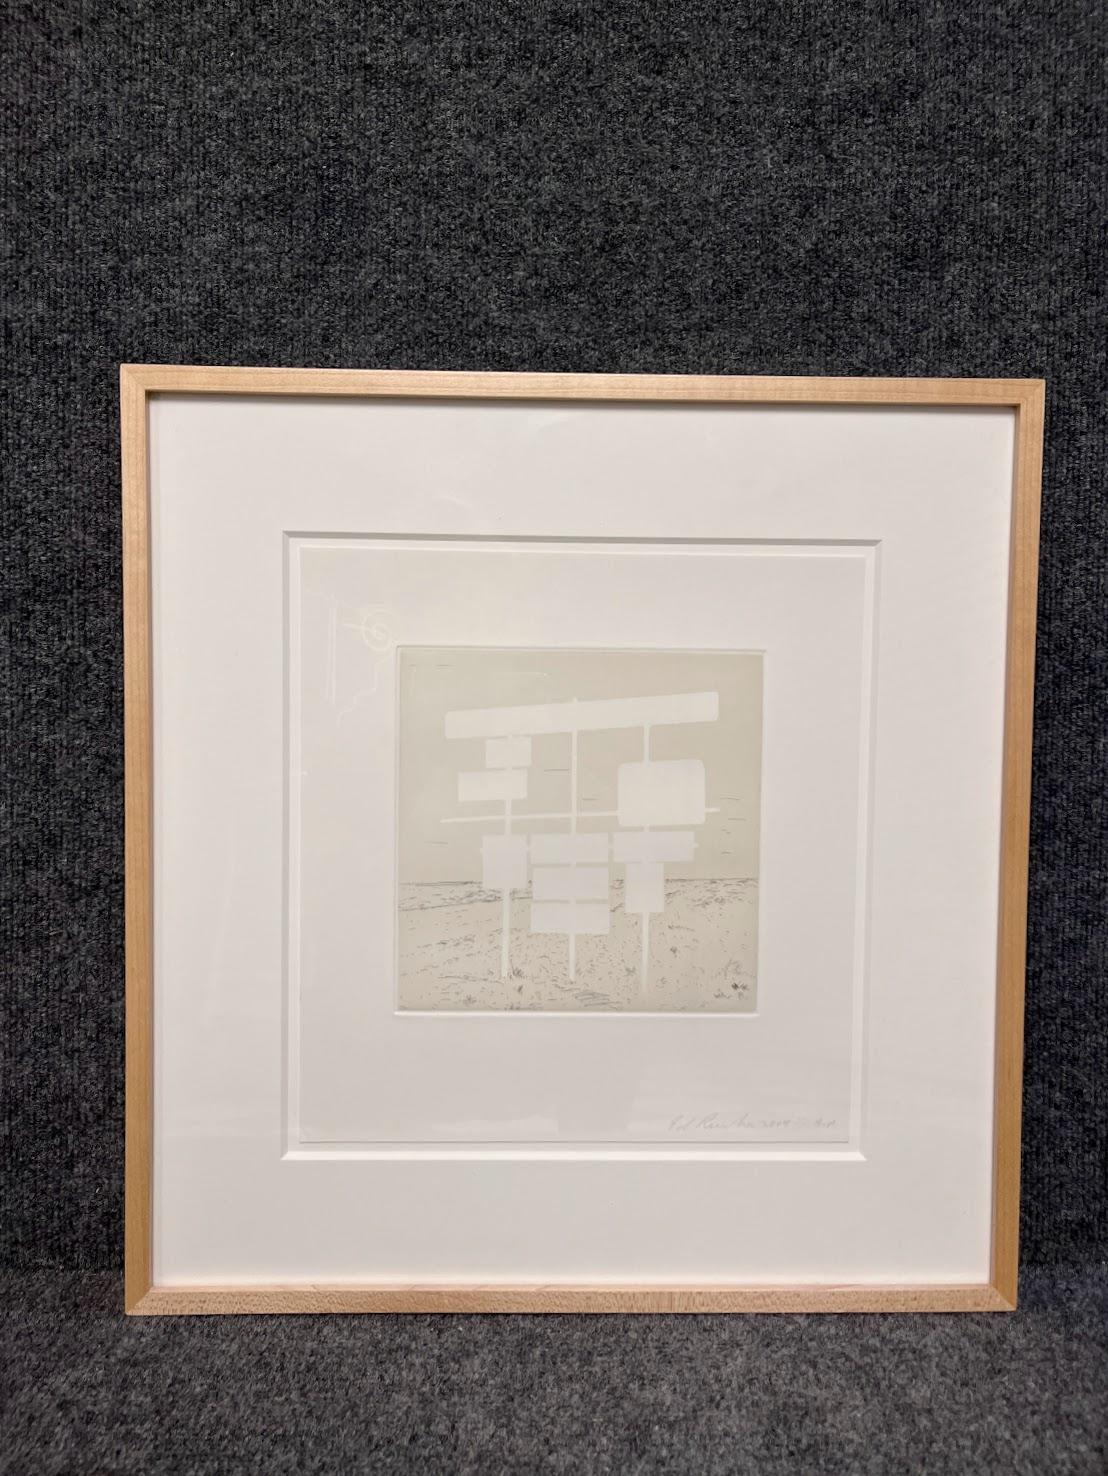 Ed Ruscha 'Blank Signs' Signed Etching and Aquatint Four Framed Prints 2004 For Sale 11